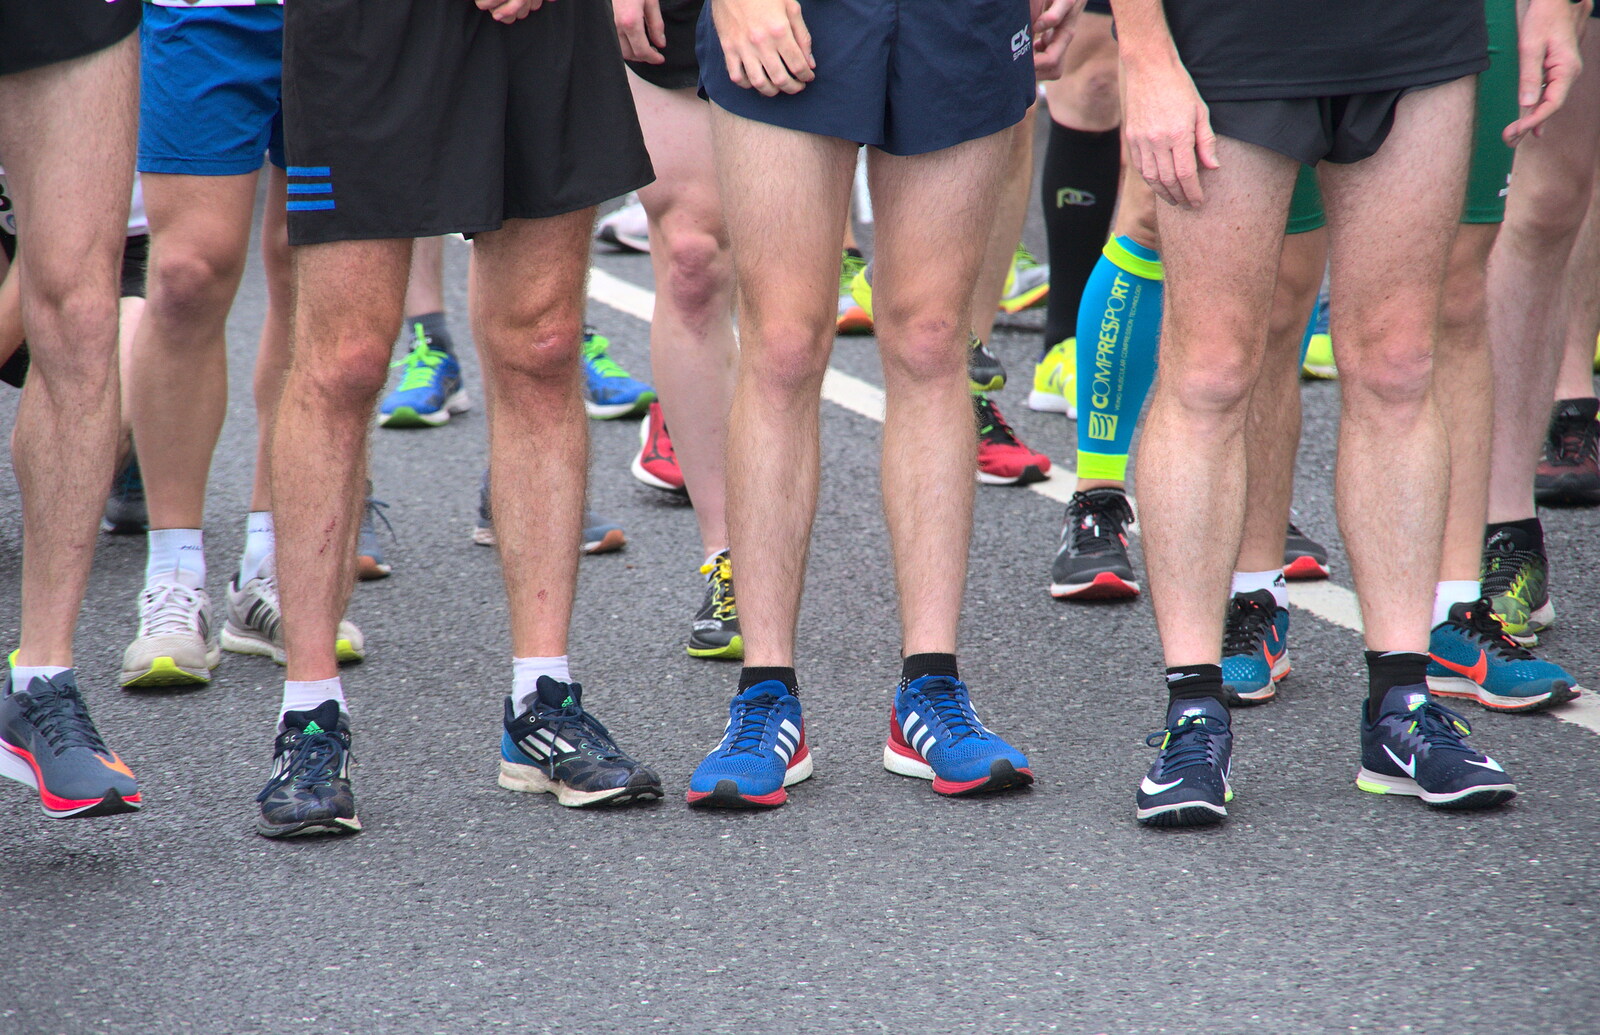 Knobbly knees from The Dún Laoghaire 10k Run, County Dublin, Ireland - 6th August 2018